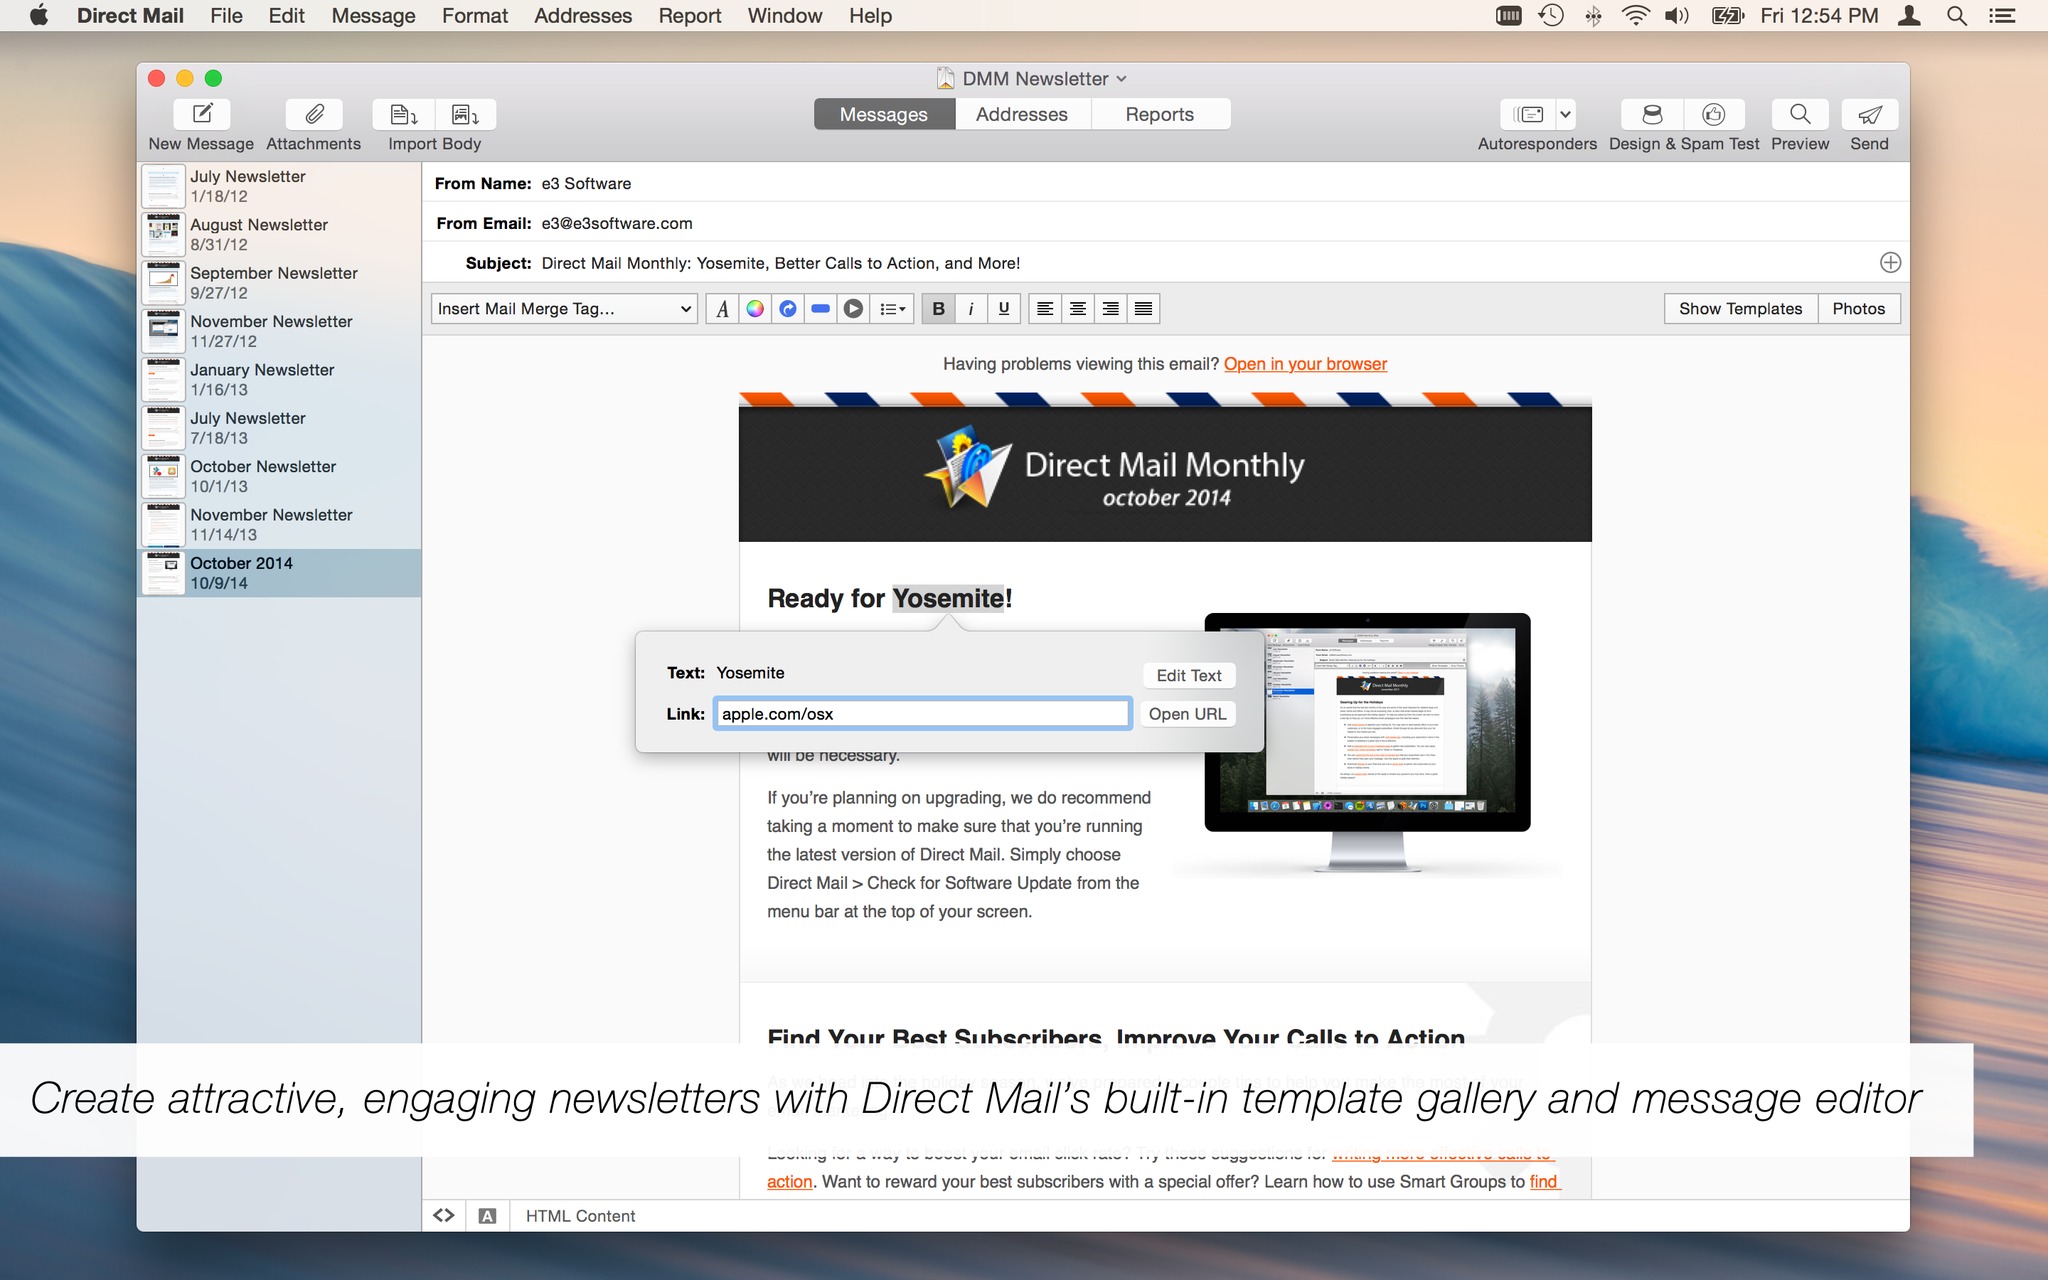 Direct Mail for Mac